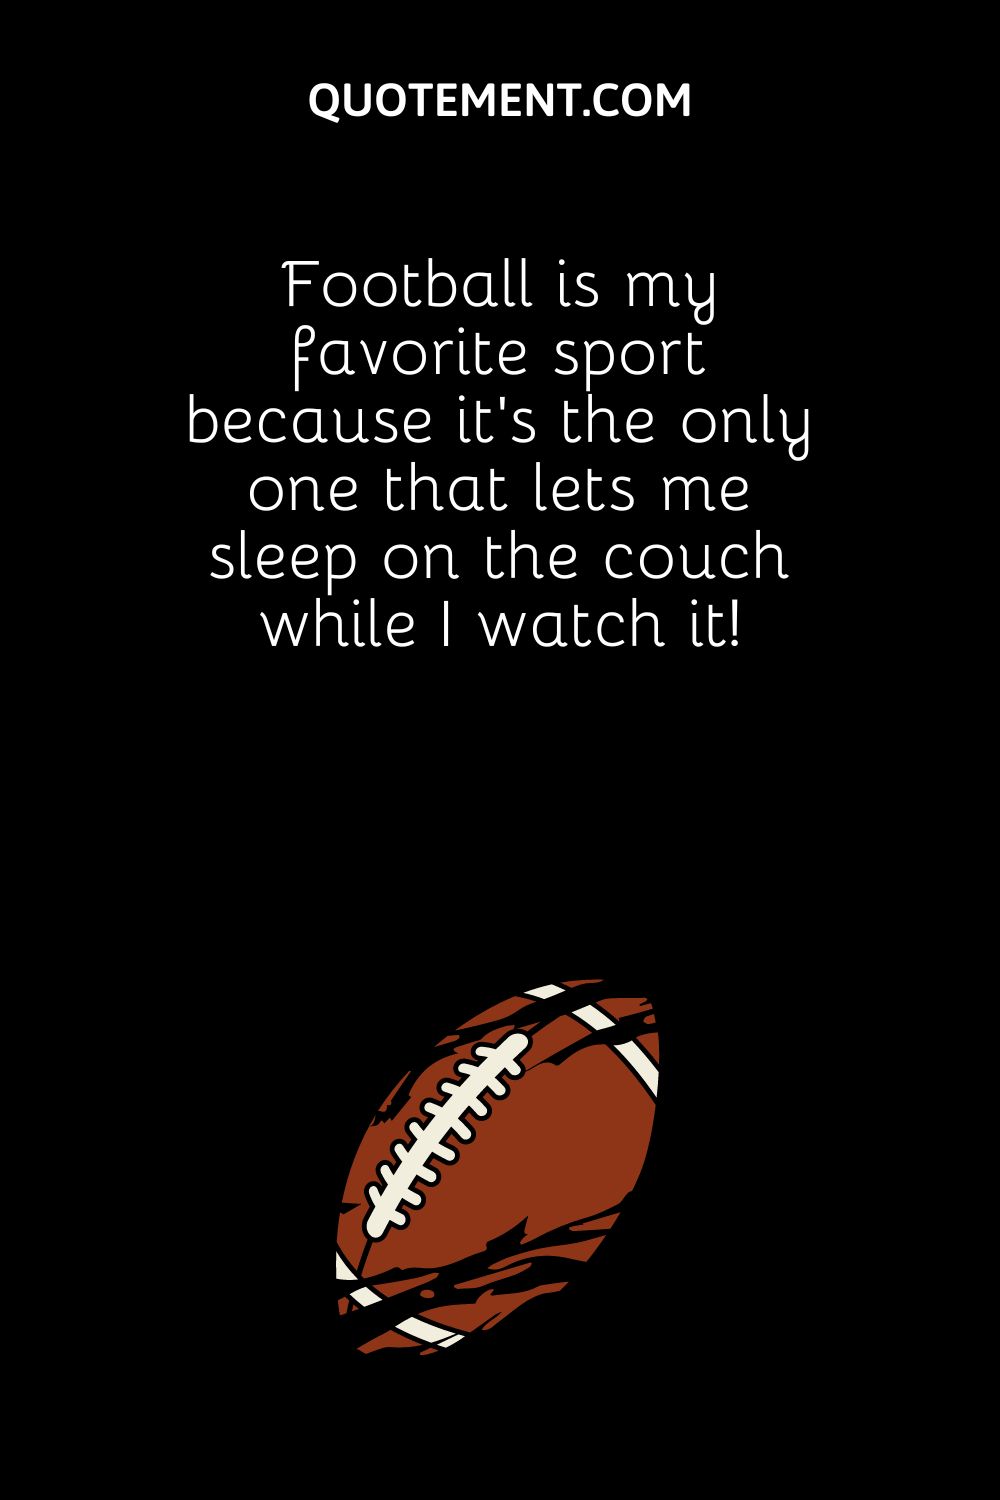 Football is my favorite sport because it’s the only one that lets me sleep on the couch while I watch it